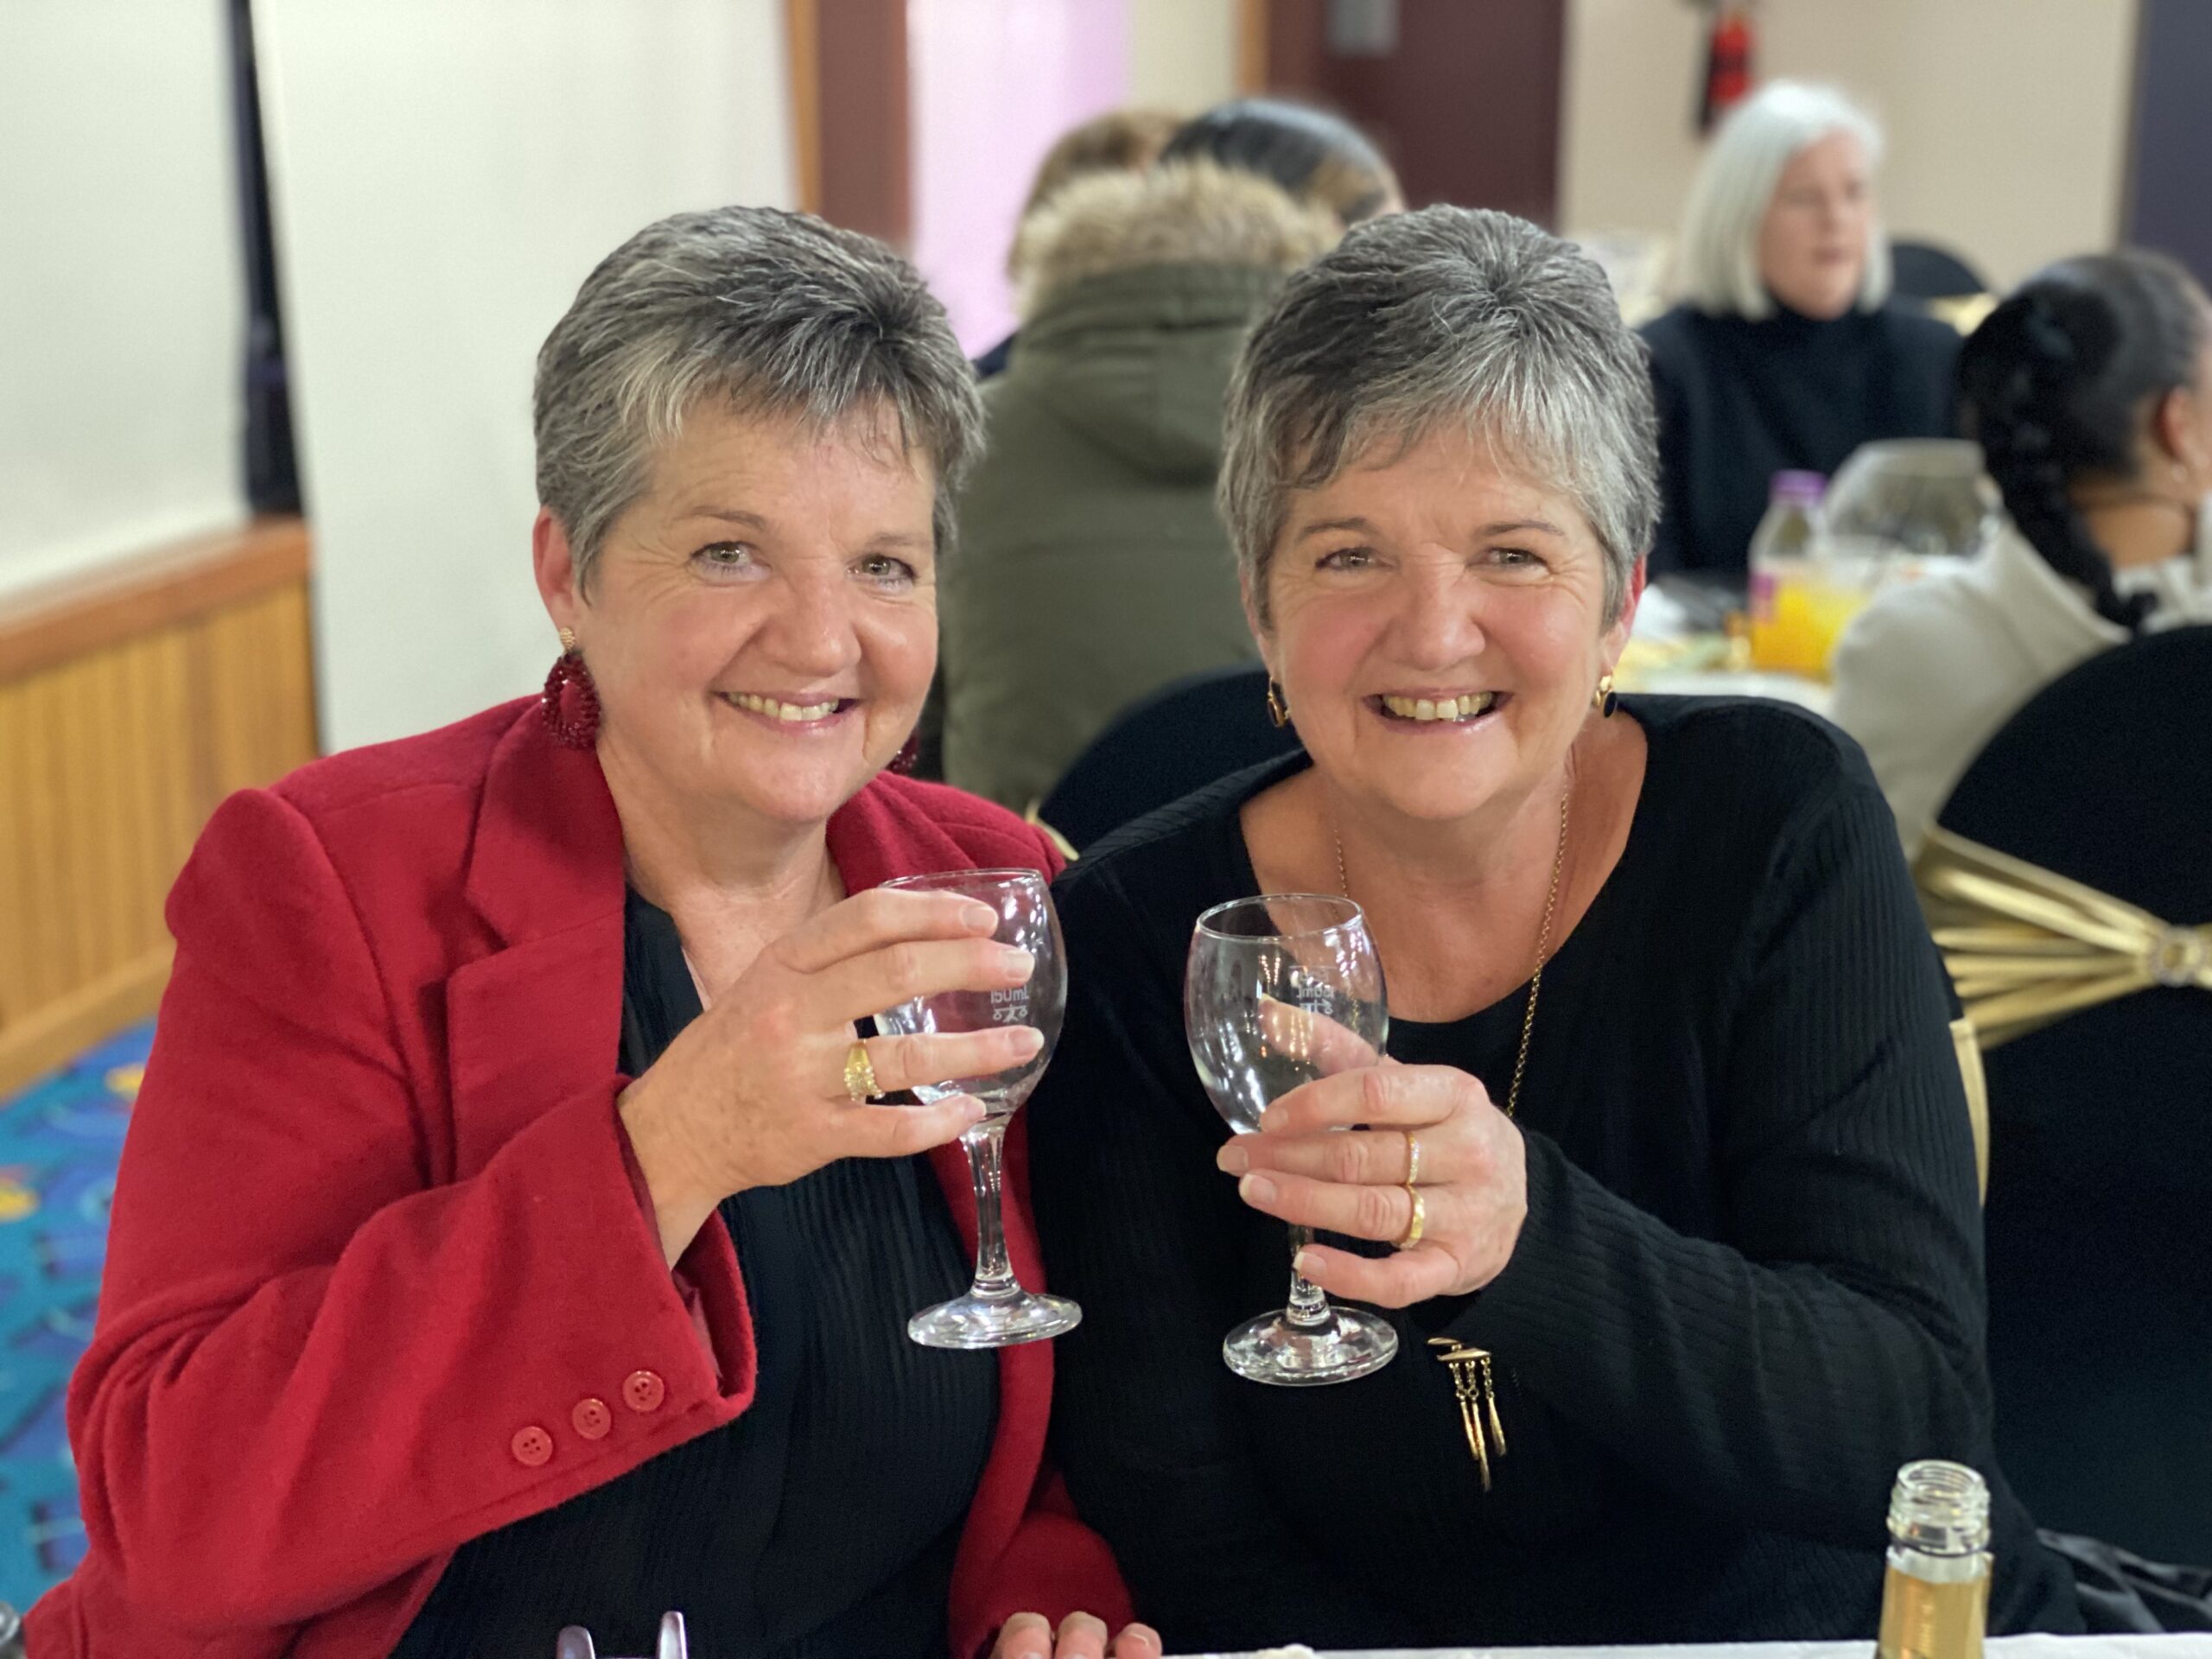 Wendy Smith and Christine Duncan enjoying the dinner and comedy night at the Wee Waa Bowling Club.